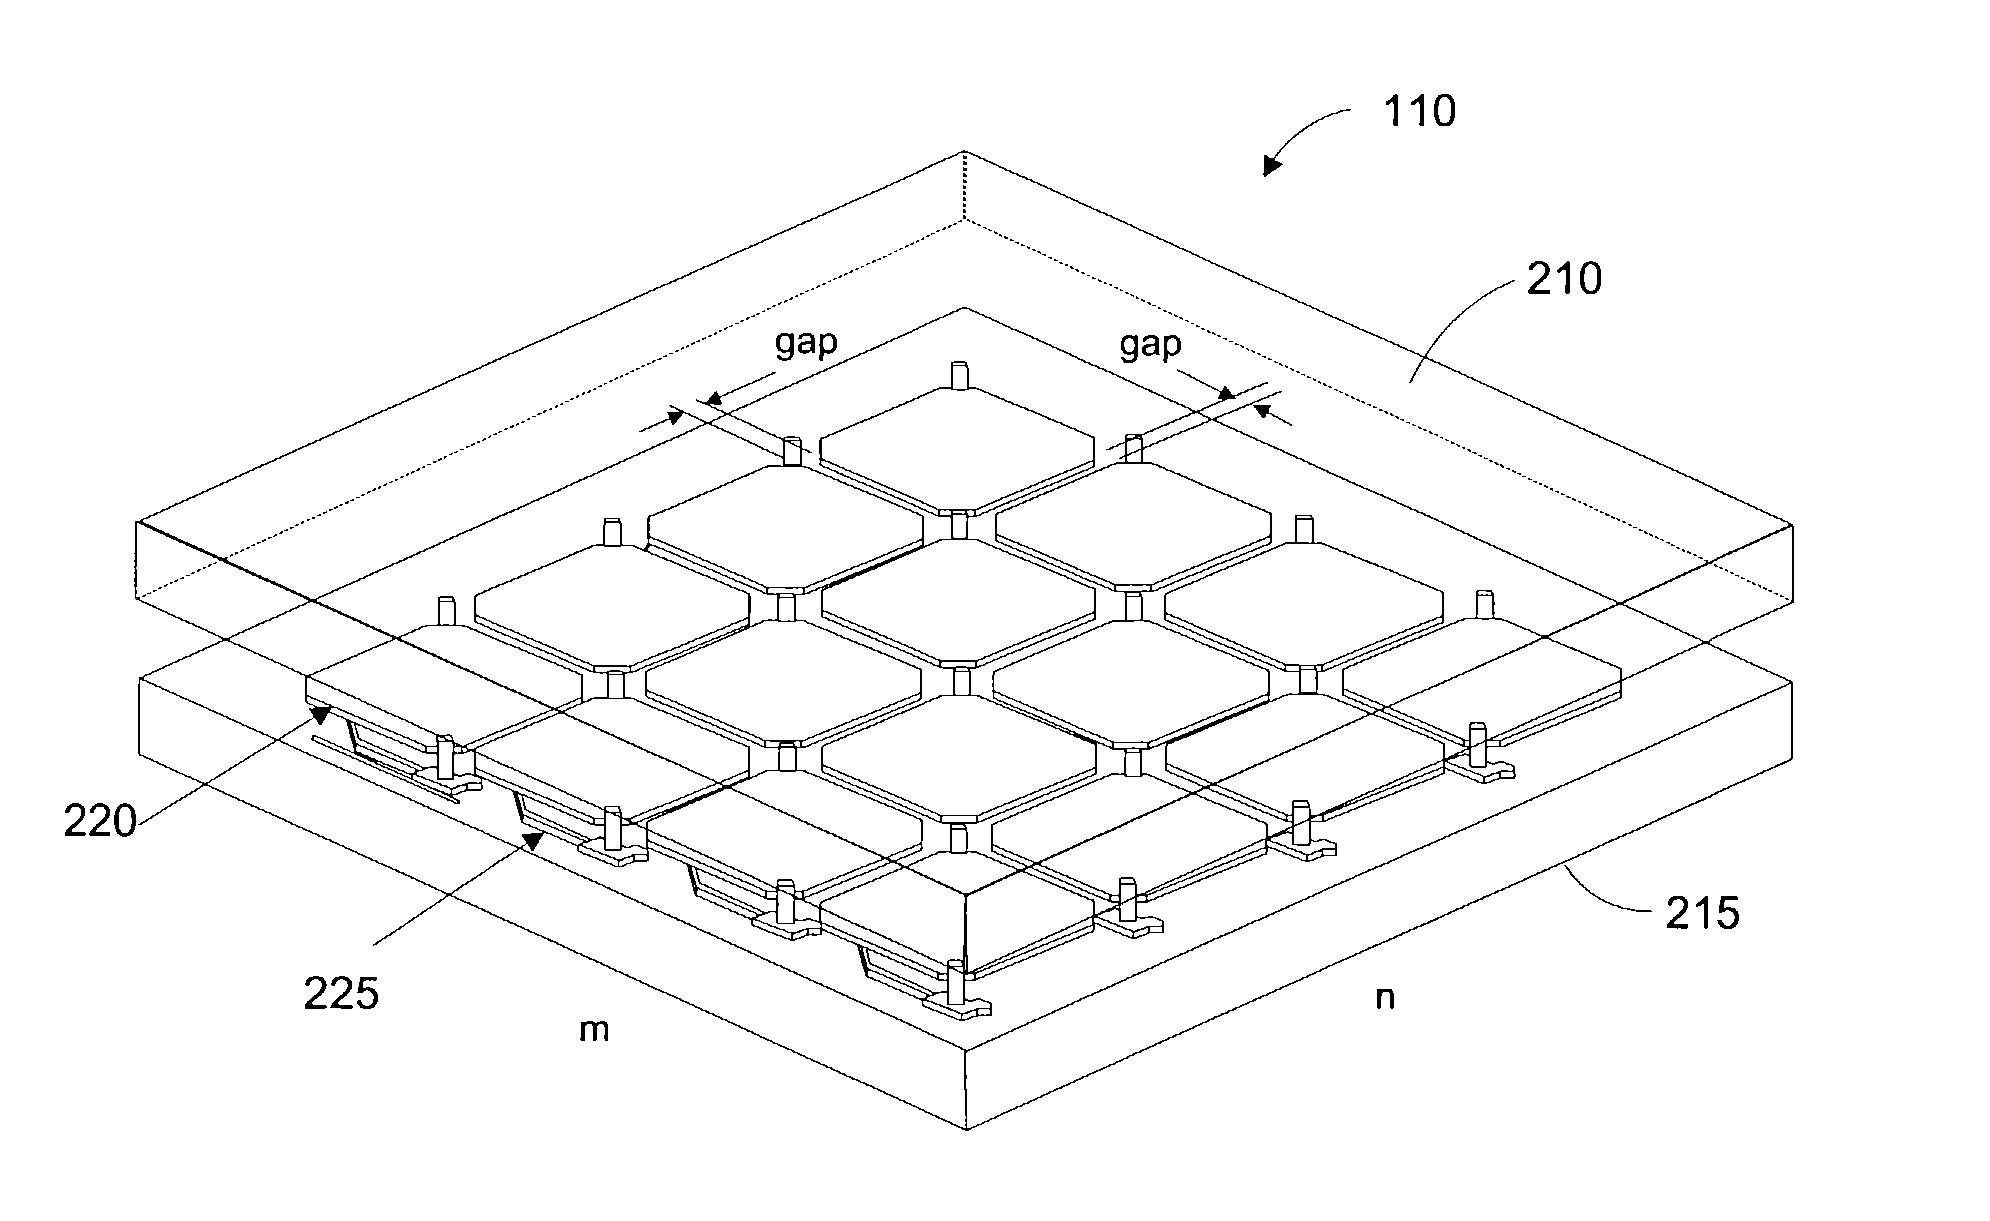 Micromirror array device with a small pitch size